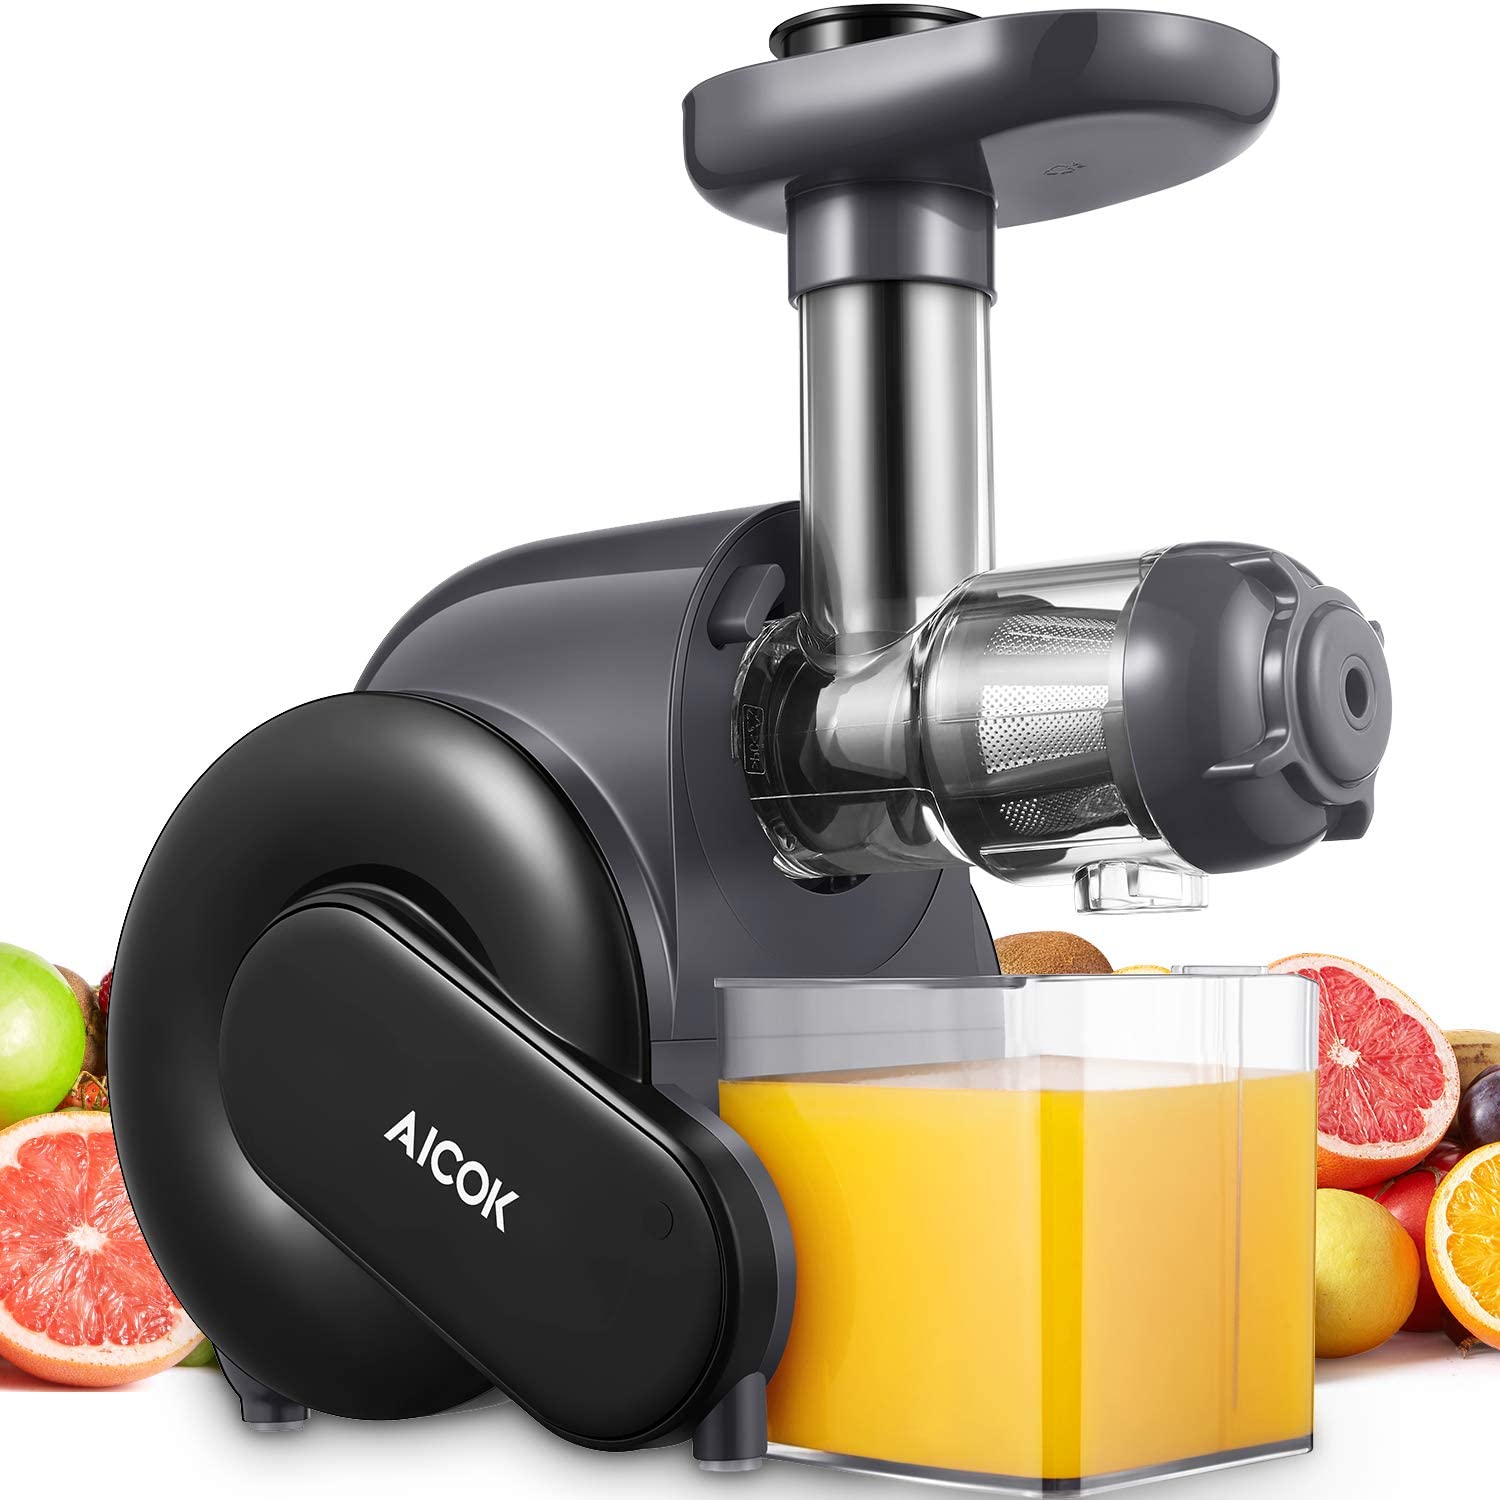 FDA Approved Slow Juicer IKICH 64RPM Golden Ratio Speed Slow Masticating Juicer with 200W Quiet Efficient Motor Brush,Juice Recipes Reverse Function Cold Press Juicer with Safe Lock BPA-Free